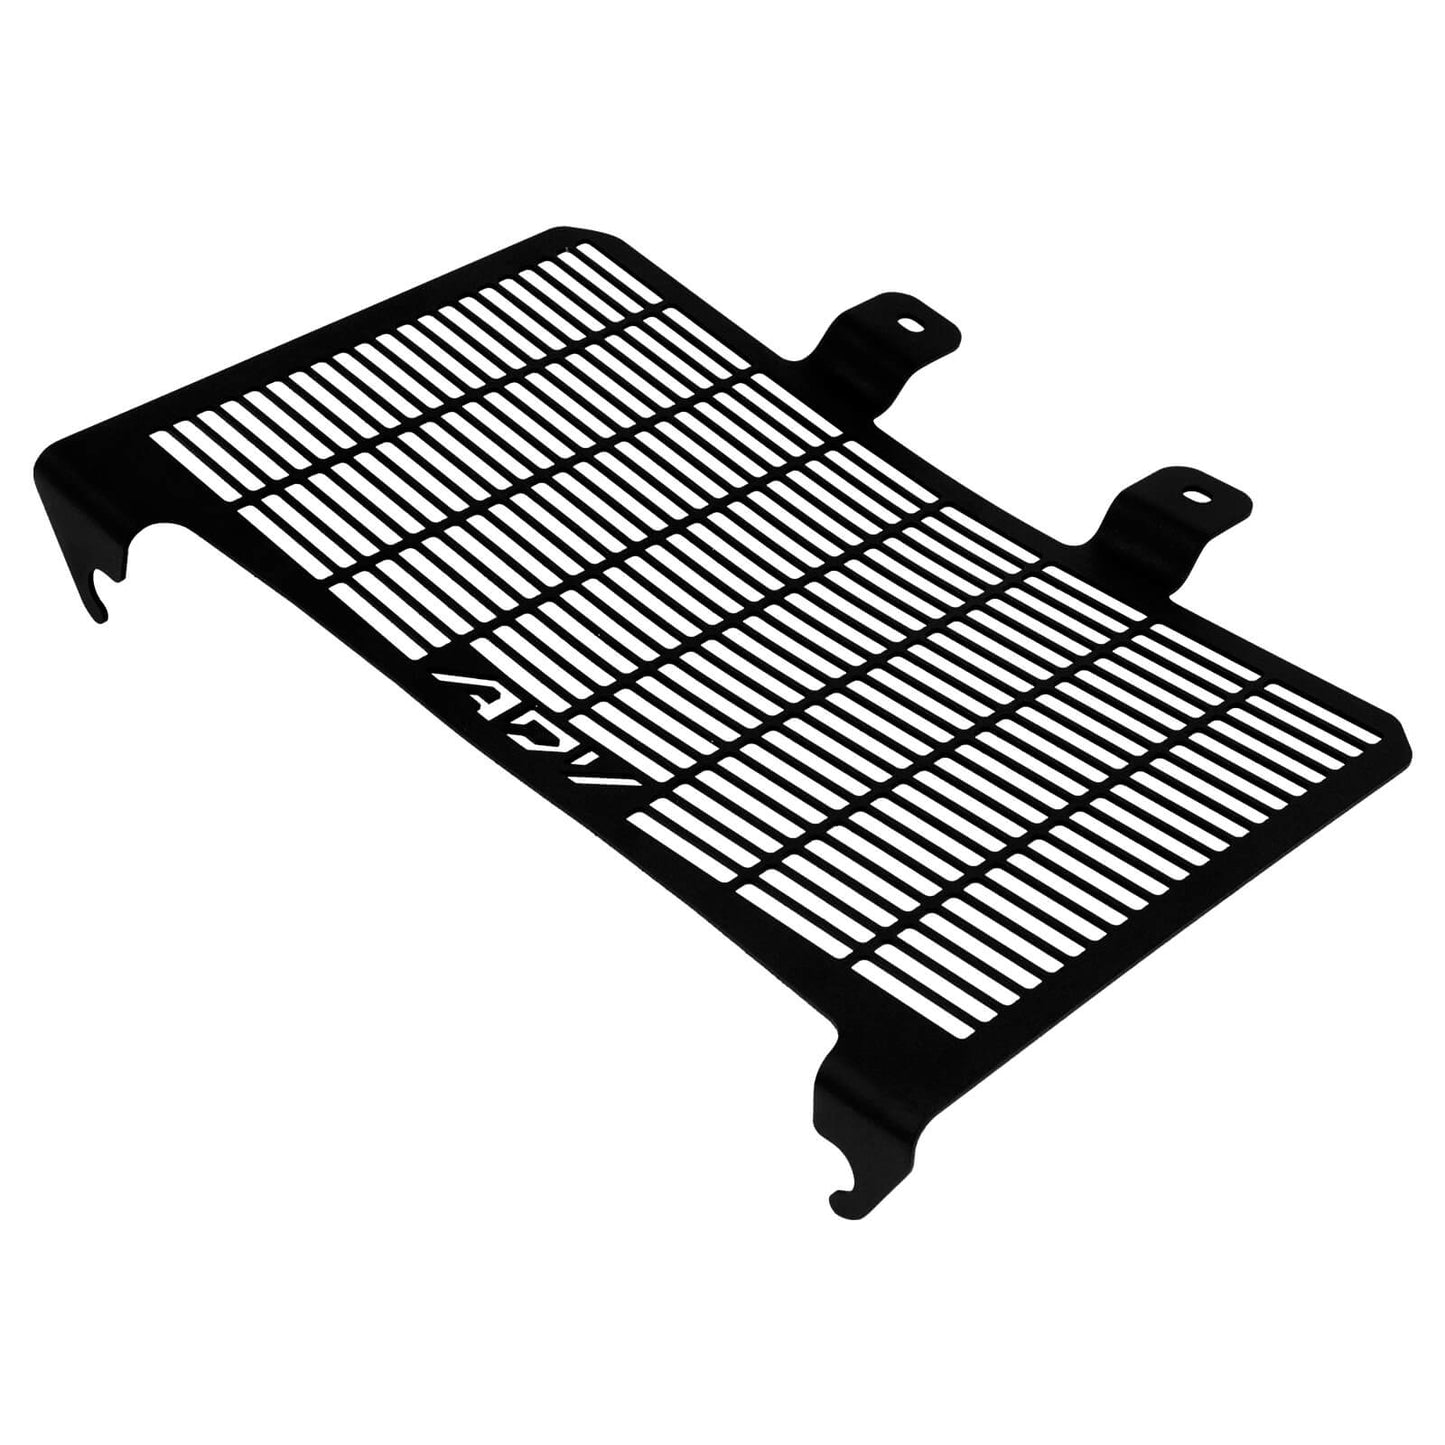 TH029301-mactions-shield-radiator-guard-grille-cover-for-Pan-America